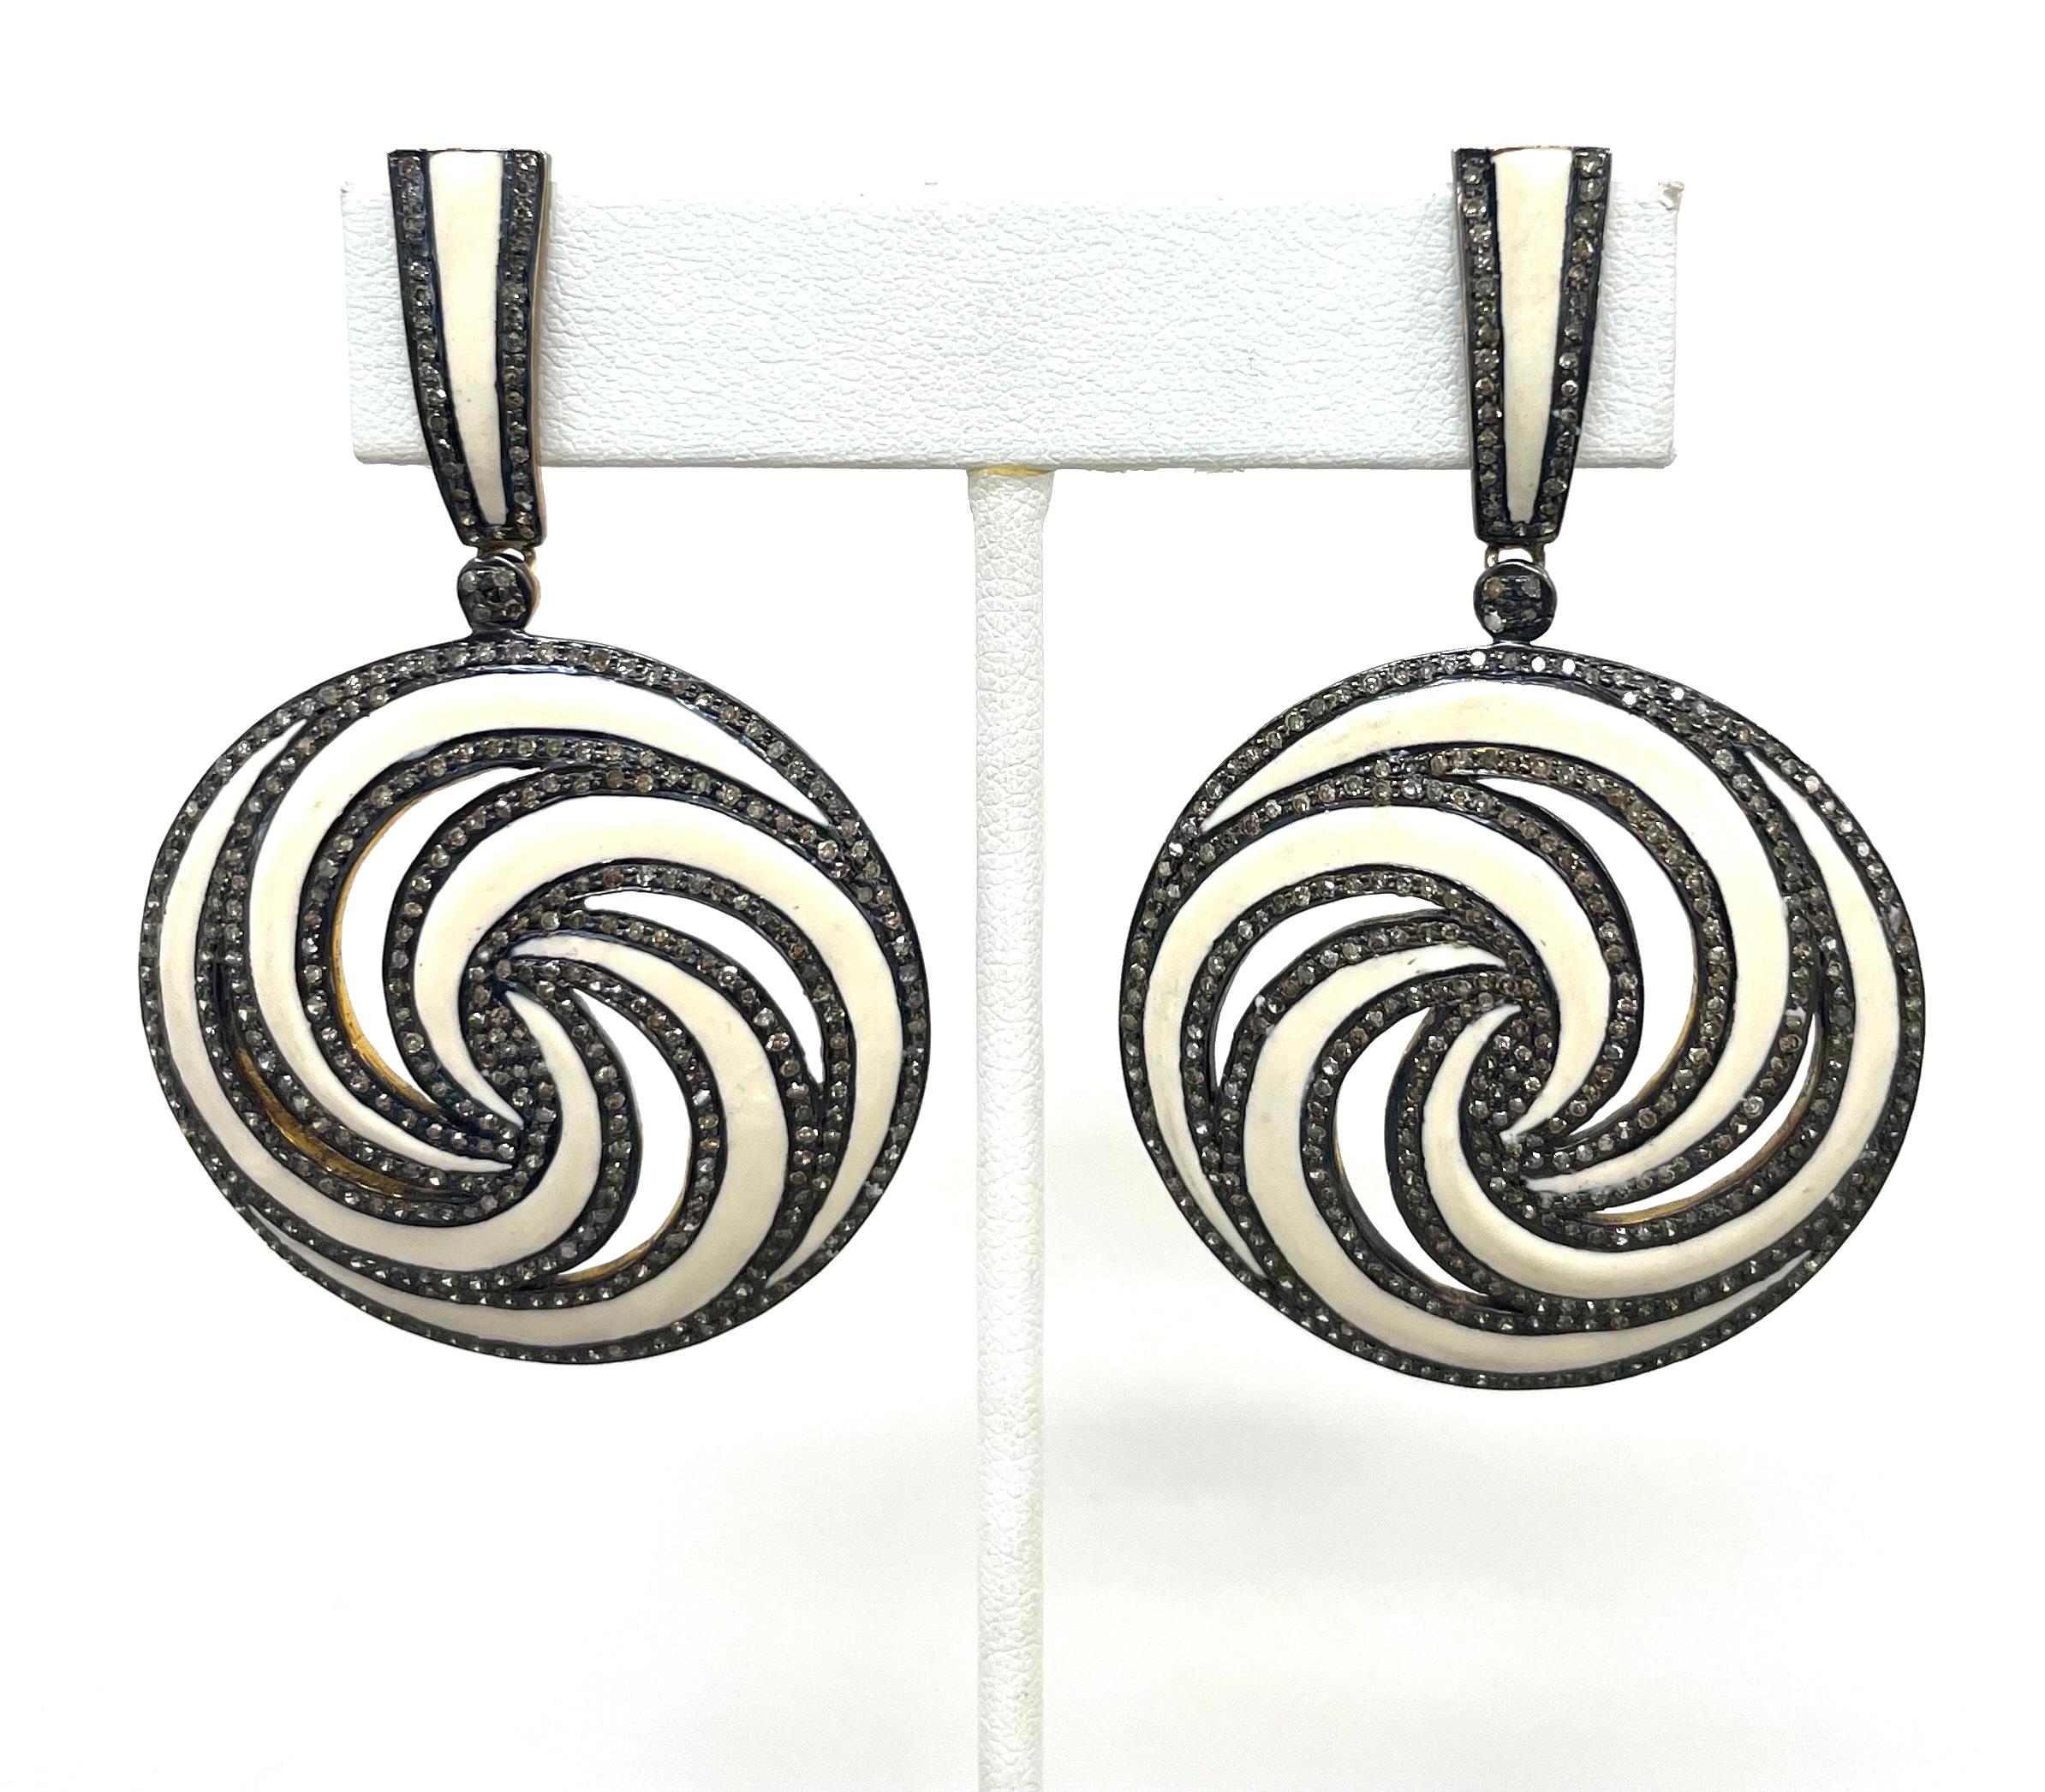  Enamel and Pave Diamond Pinwheel Design Earrings In New Condition For Sale In Laguna Beach, CA